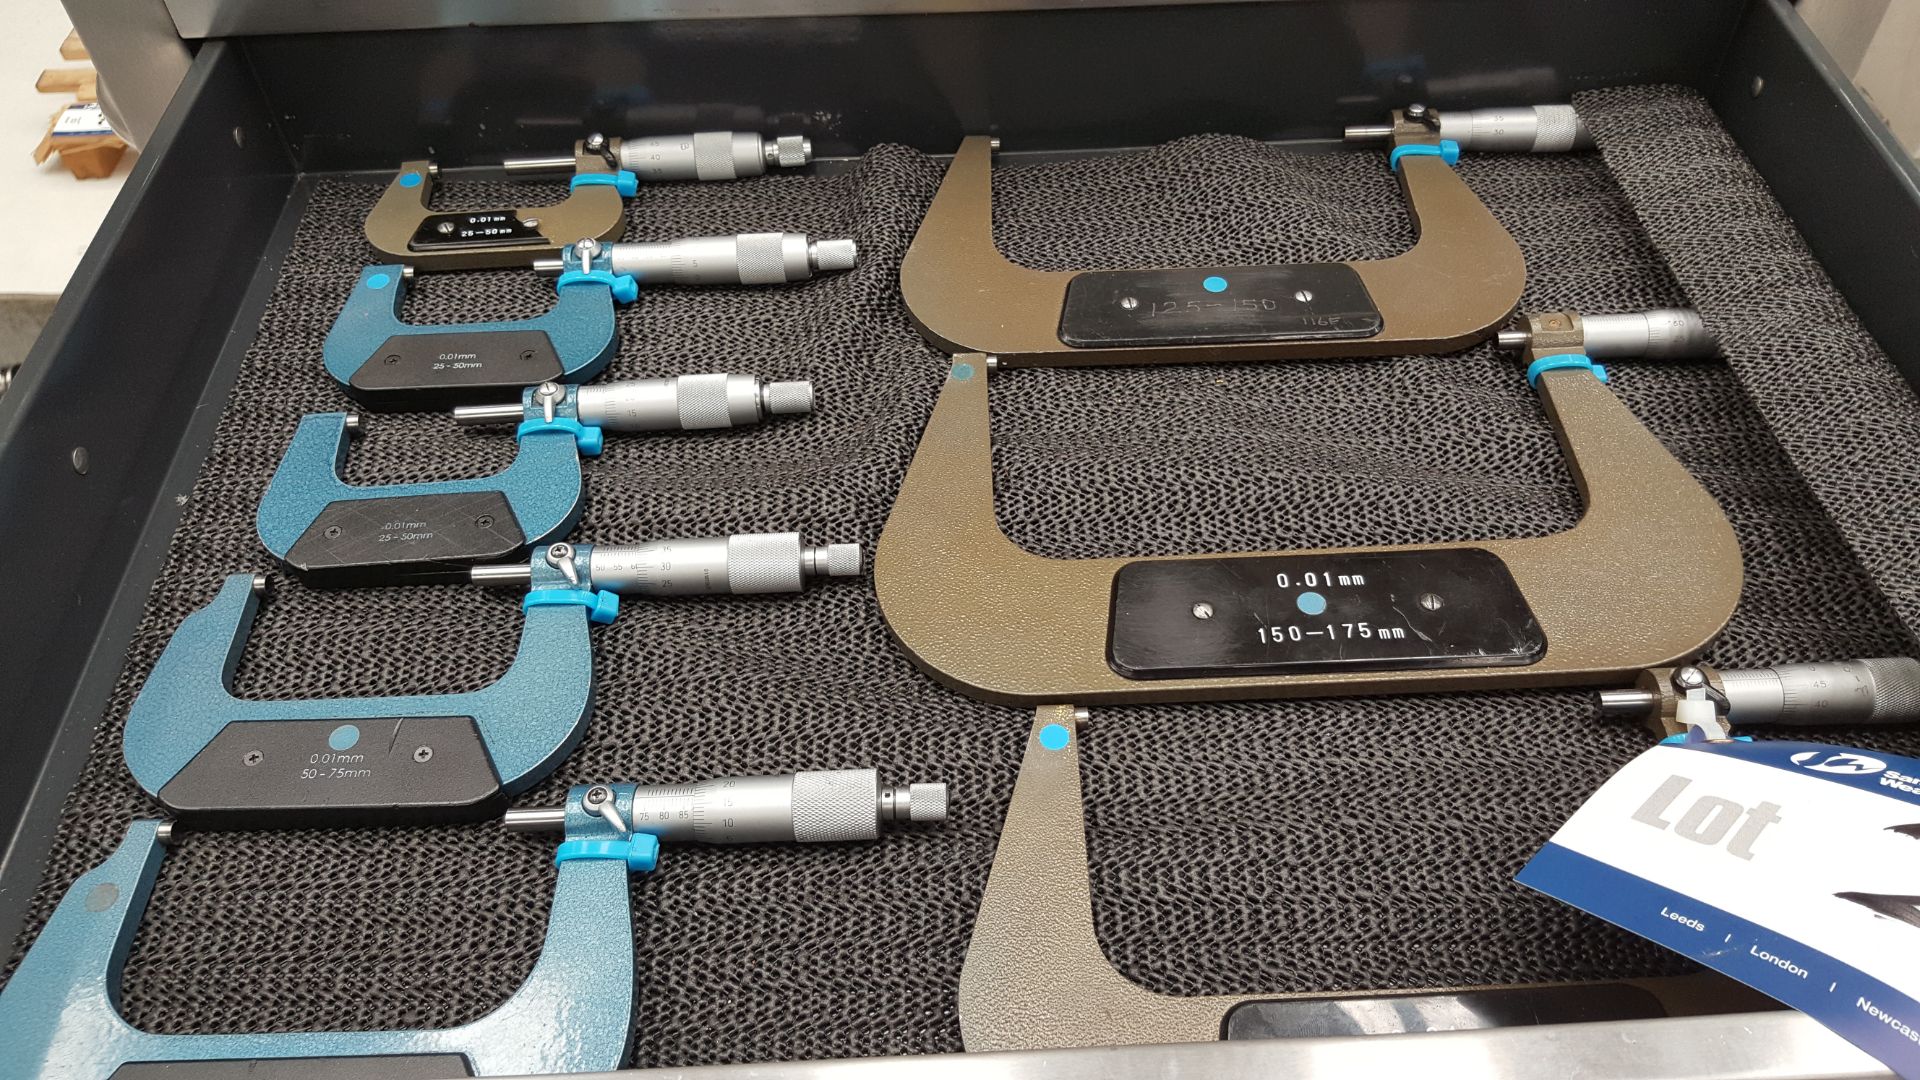 8 x External Micrometers, Various Sizes as set out